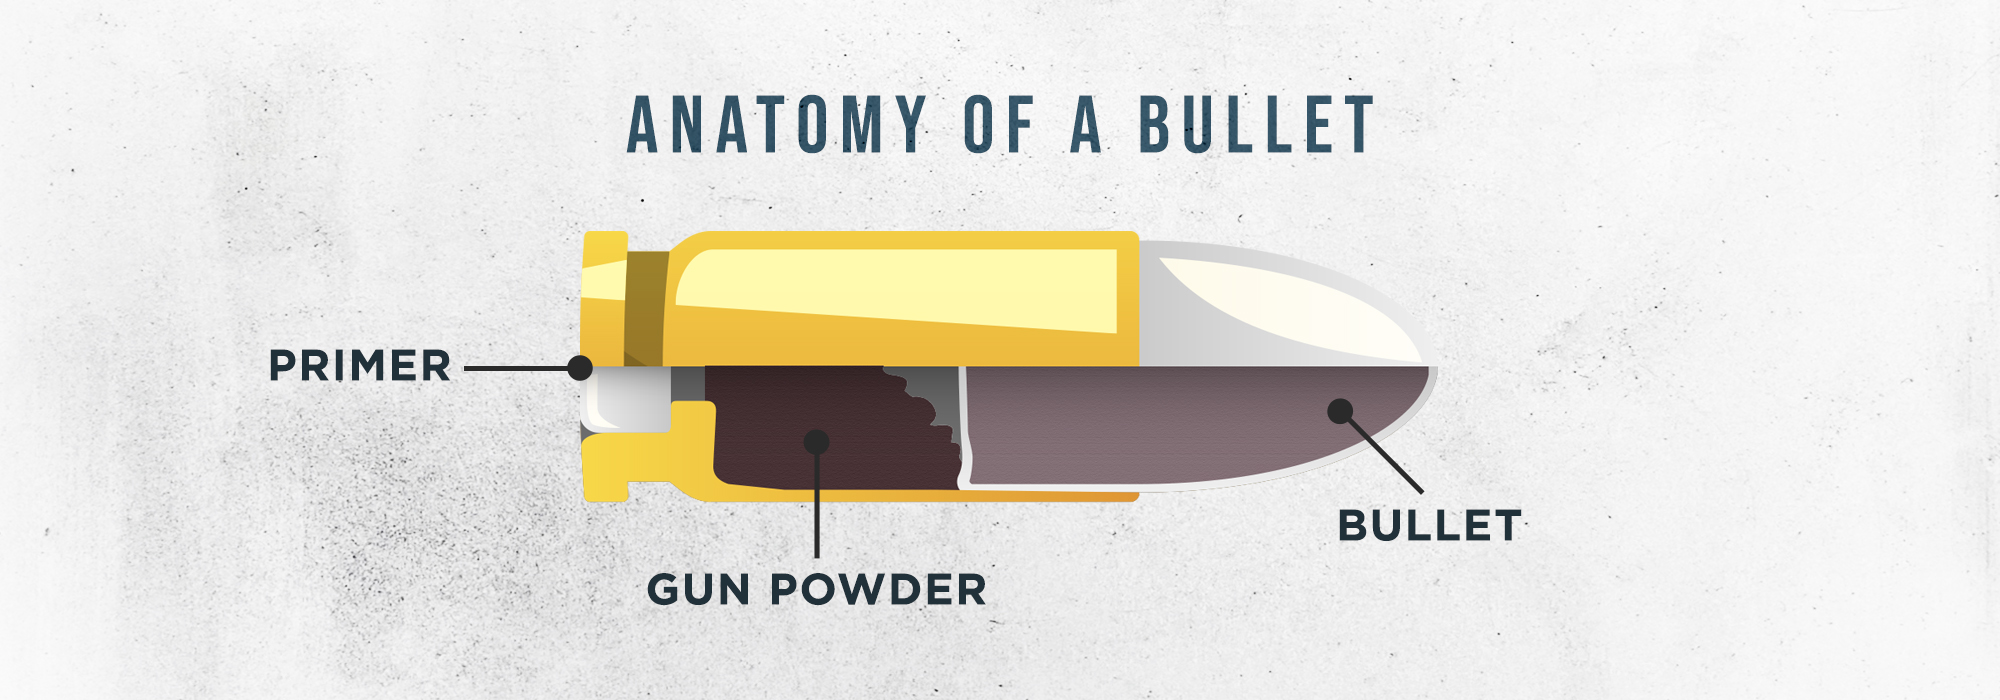 Bullet Anatomy - Visual explanation of the anatomy of a bullet